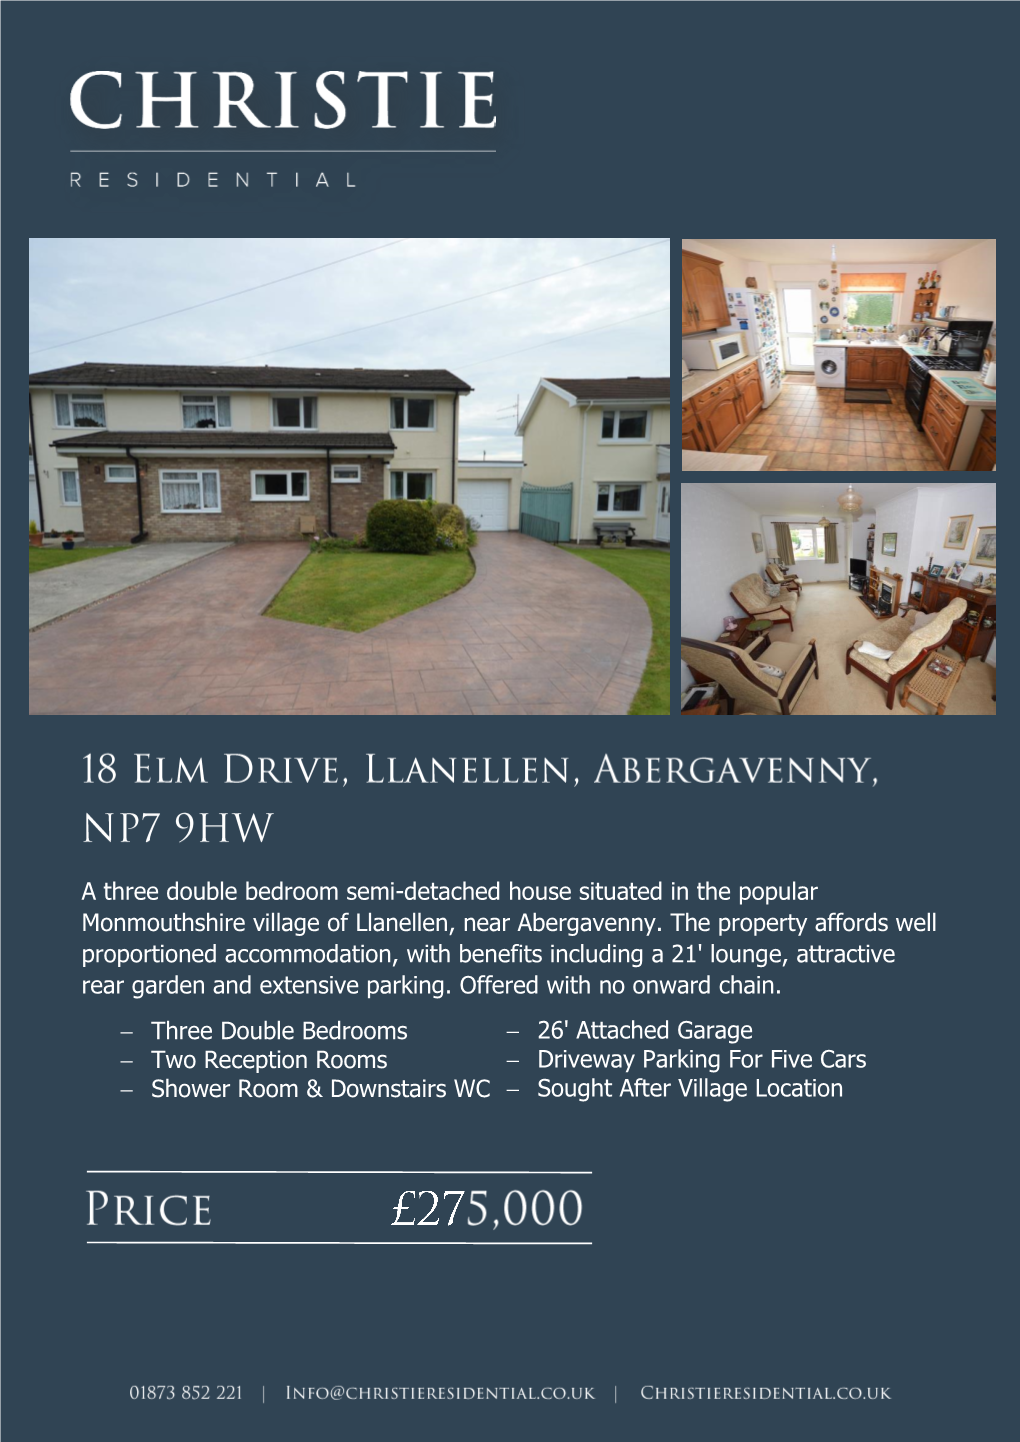 A Three Double Bedroom Semi-Detached House Situated in the Popular Monmouthshire Village of Llanellen, Near Abergavenny